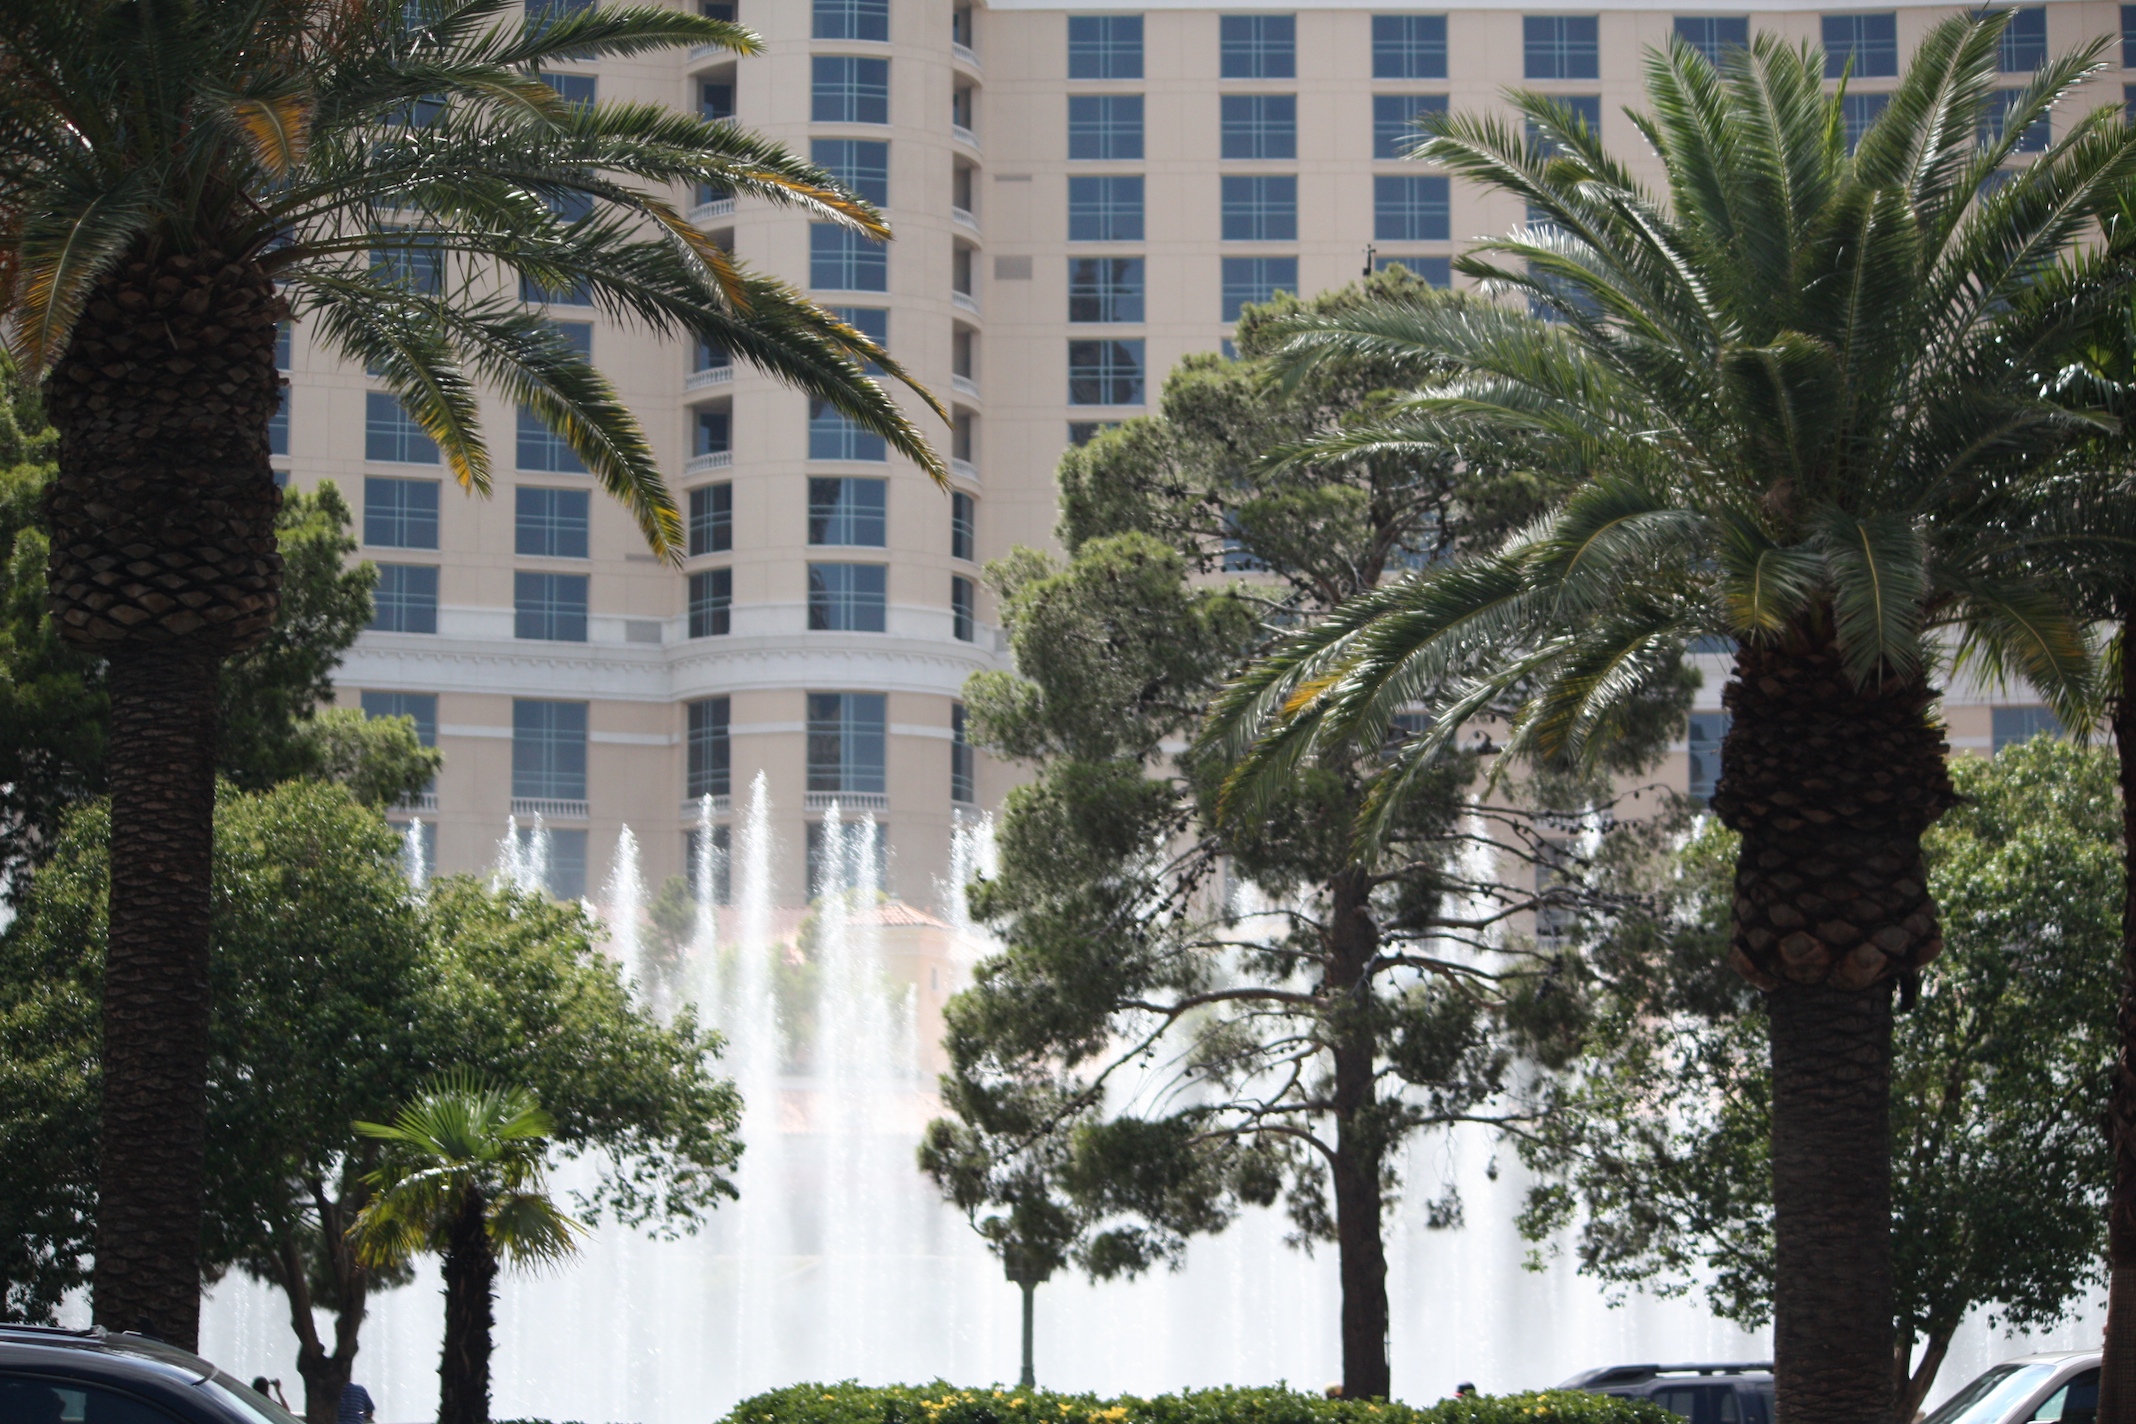 view from park of buildings, fountains and trees